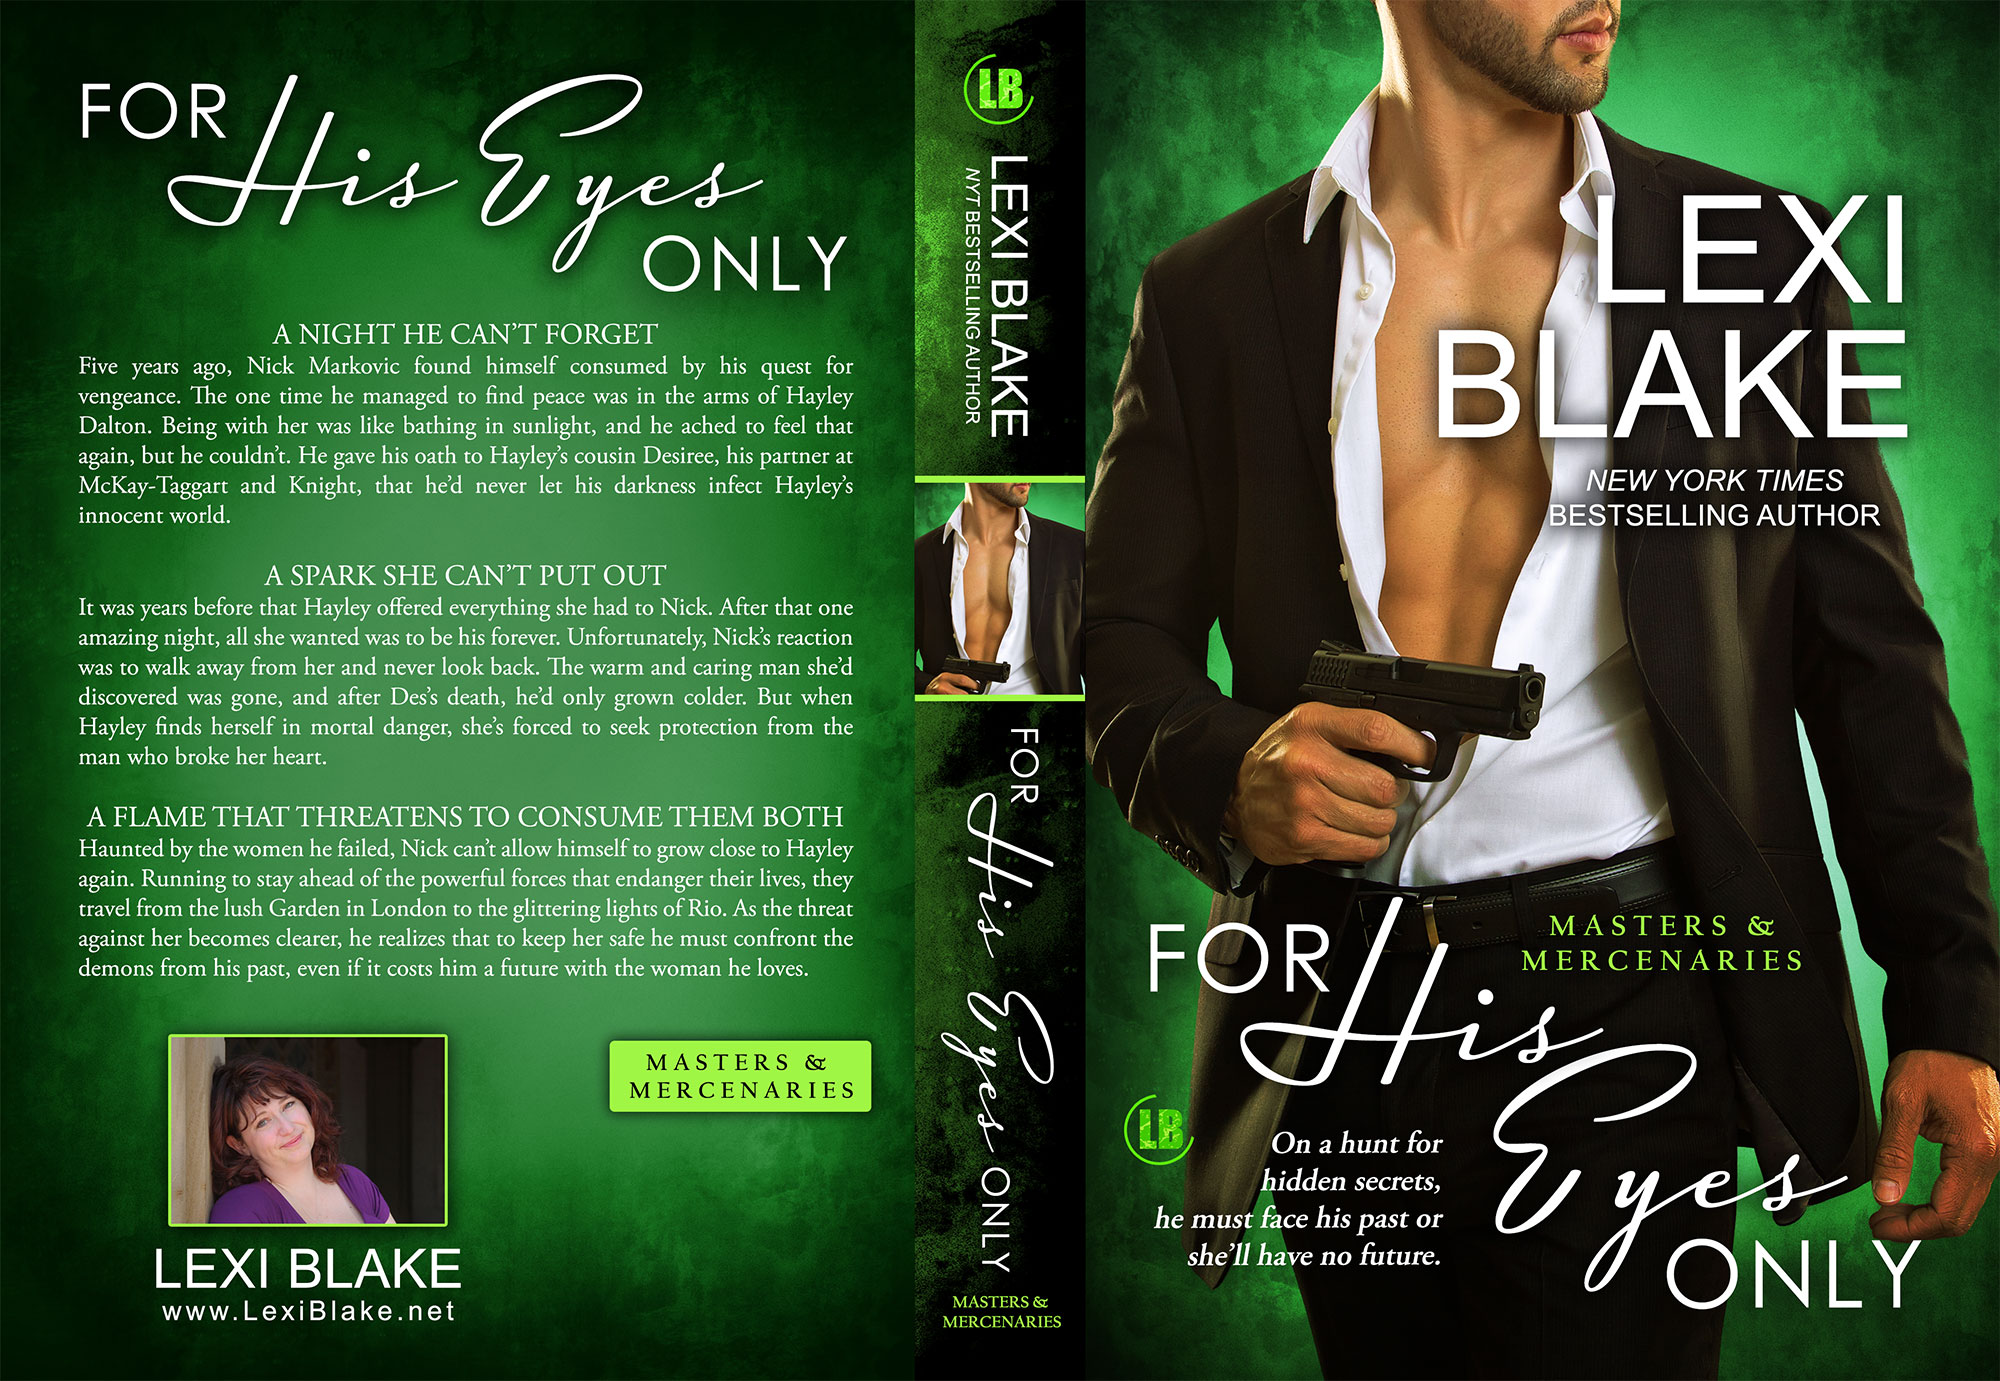 For His Eyes Only by Lexi Blake (Print Coverflat)